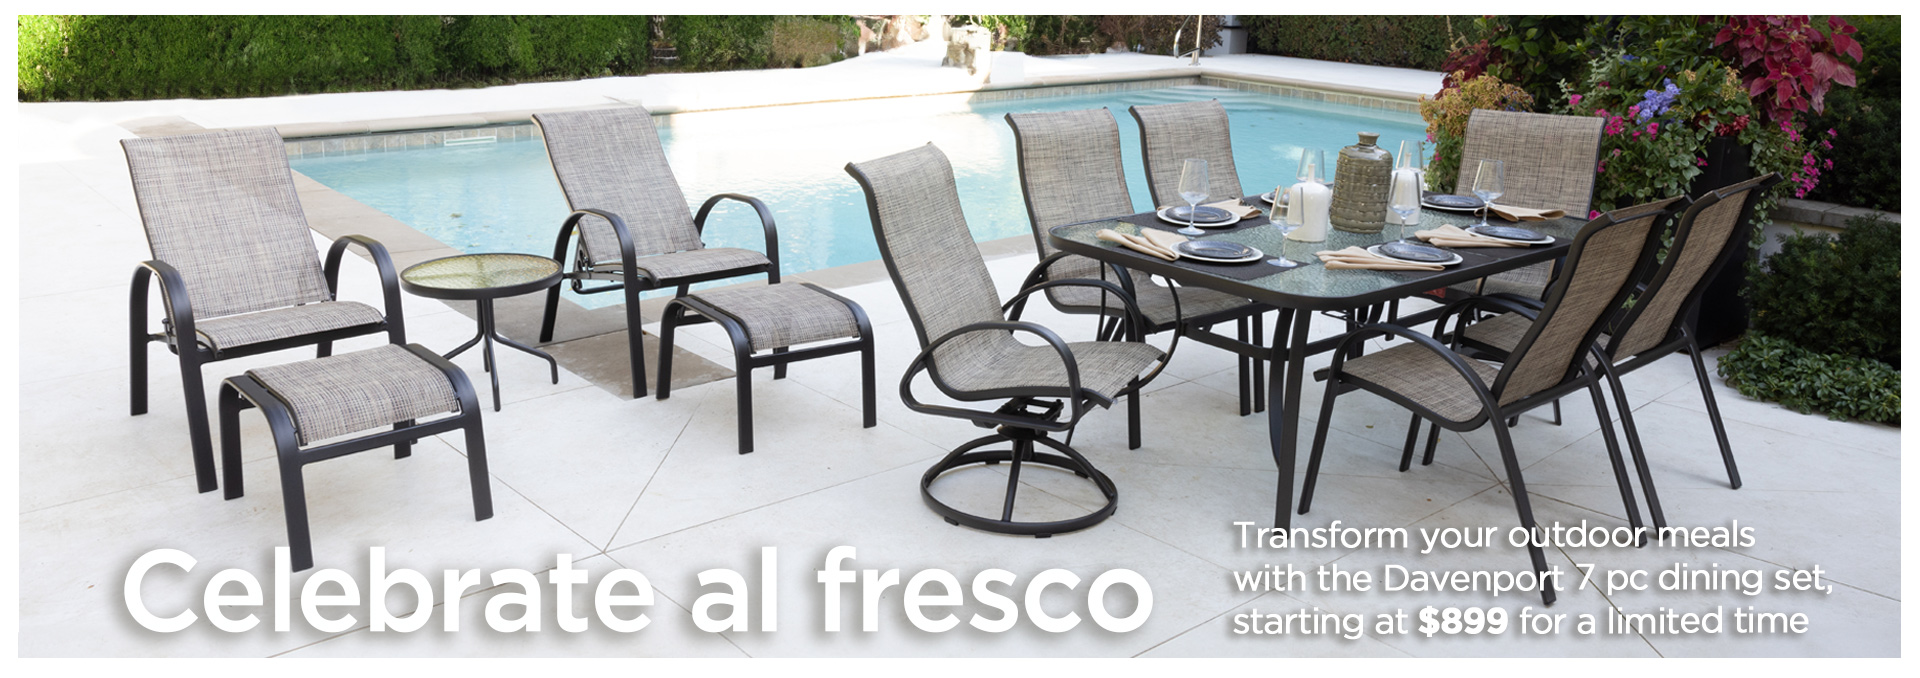 Celebrate Al Fresco with the Davenport 7 pc dining set starting at $899